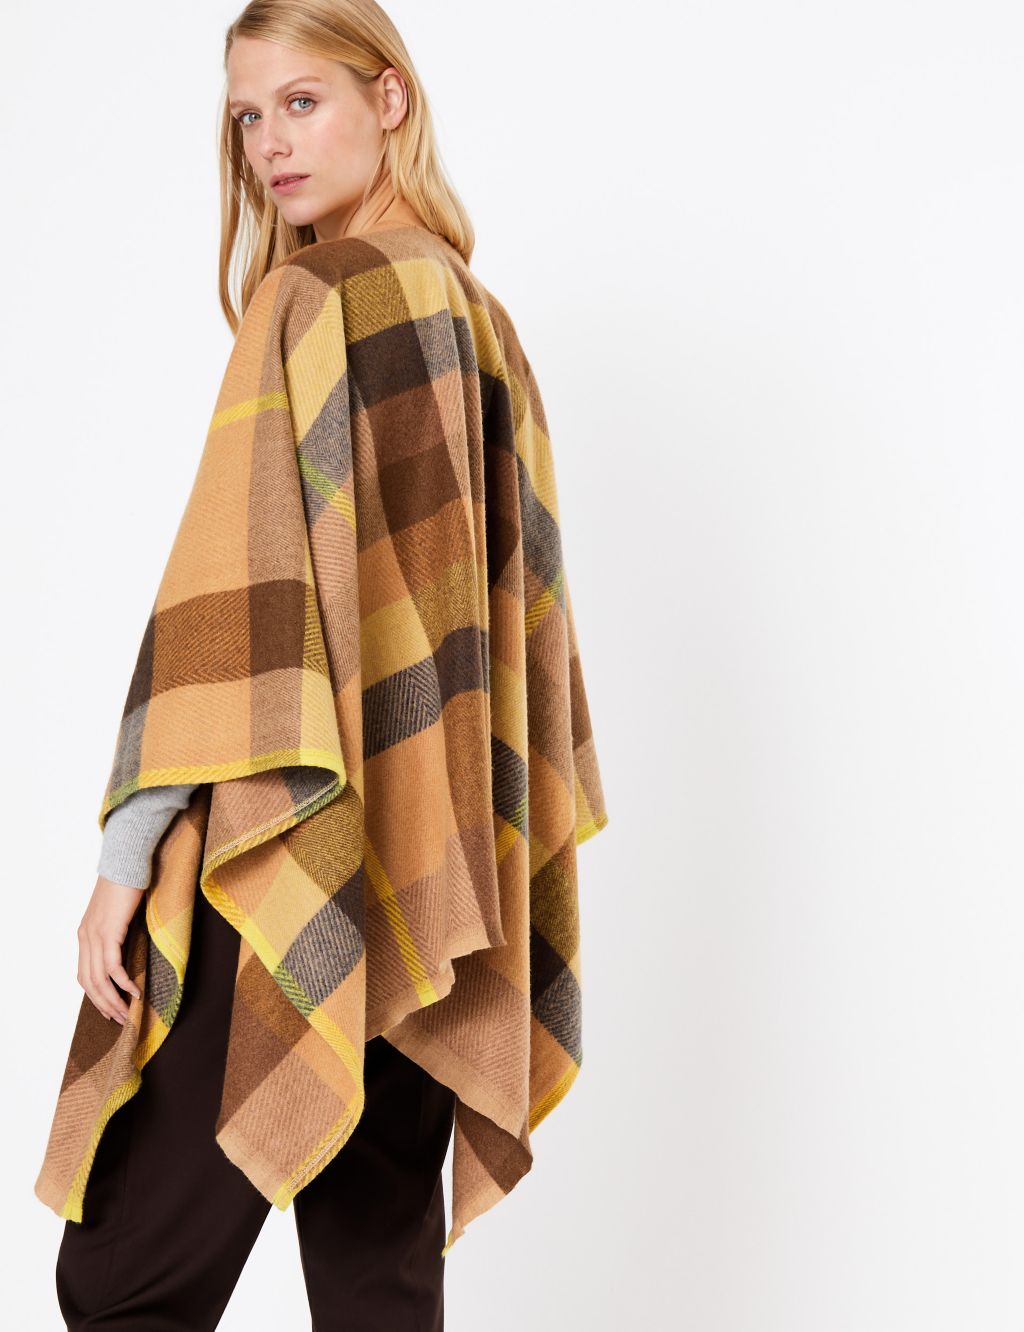 Checked Wrap | M&S Collection | M&S